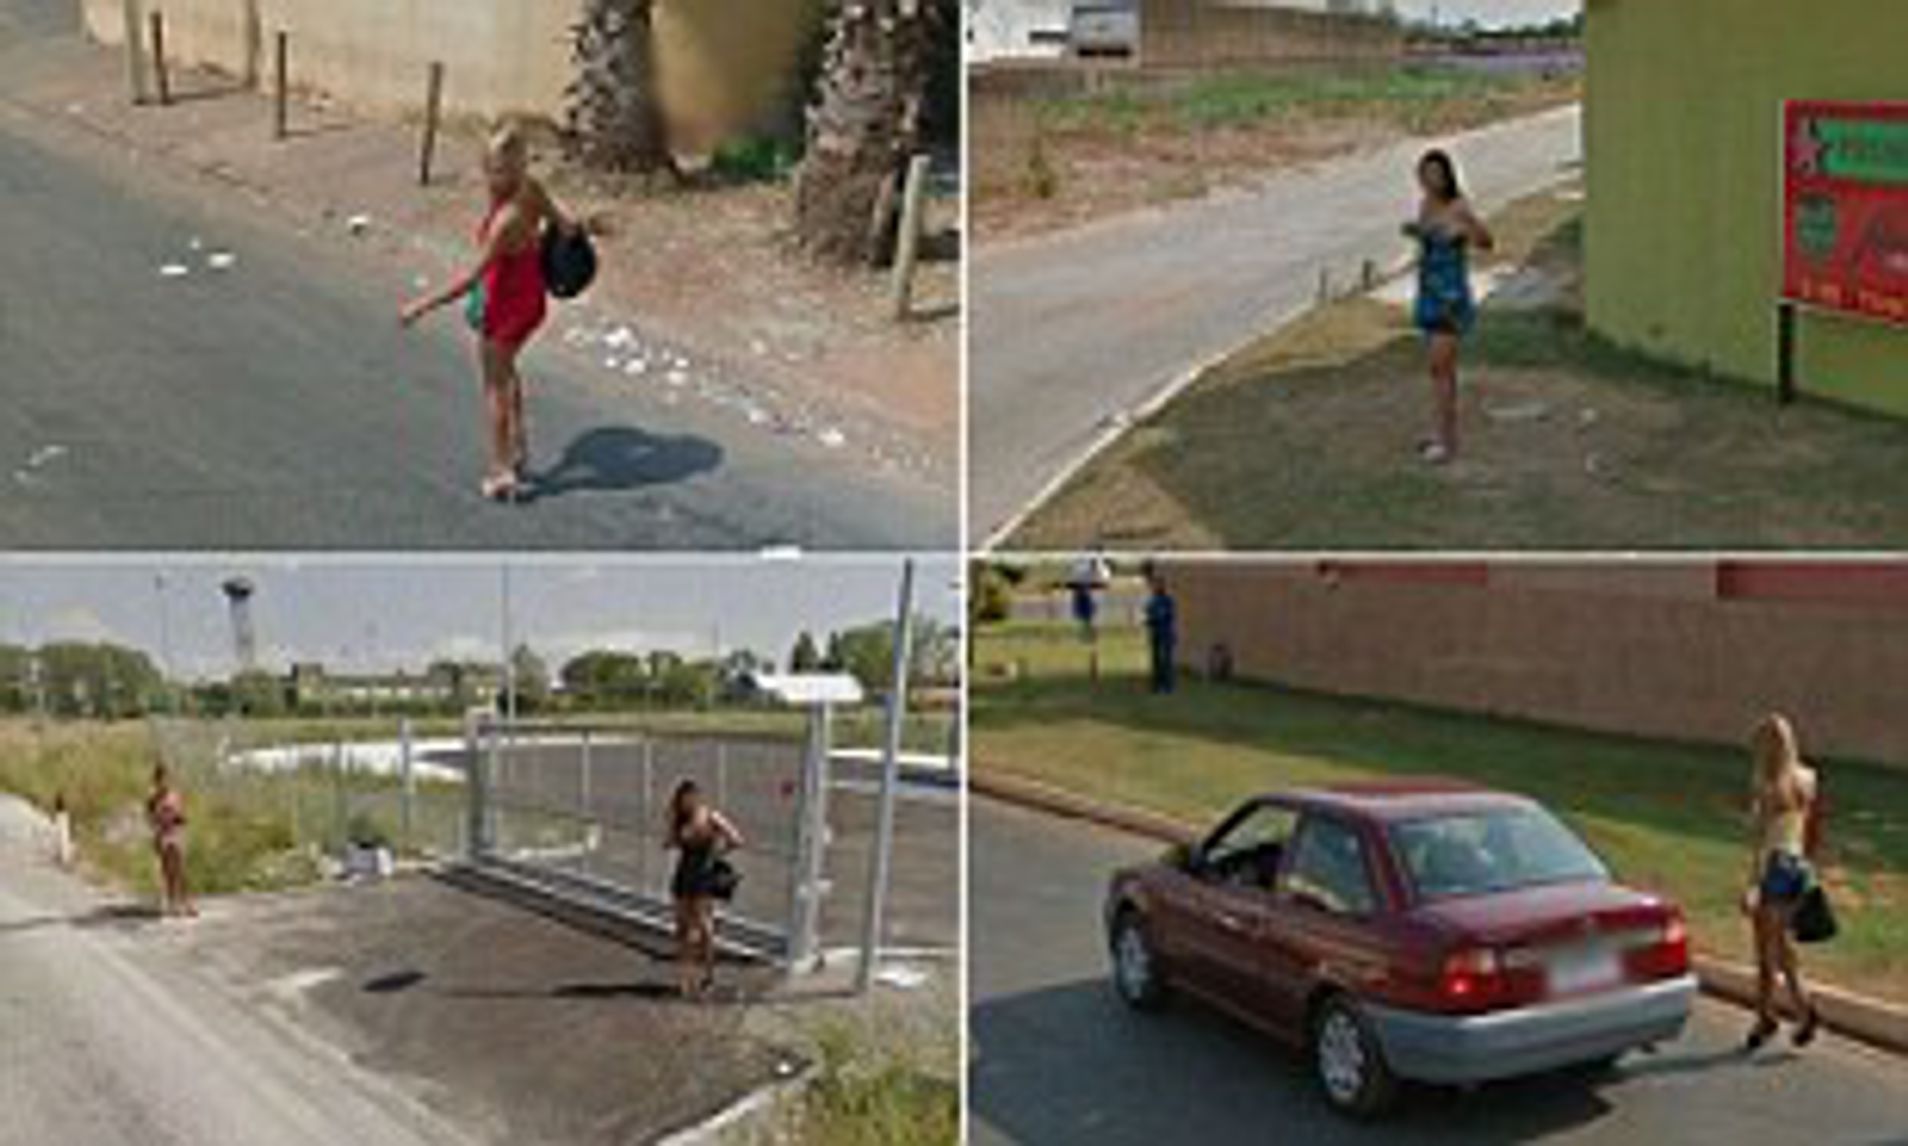 abdulaziz alali recommends hookers in street view pic